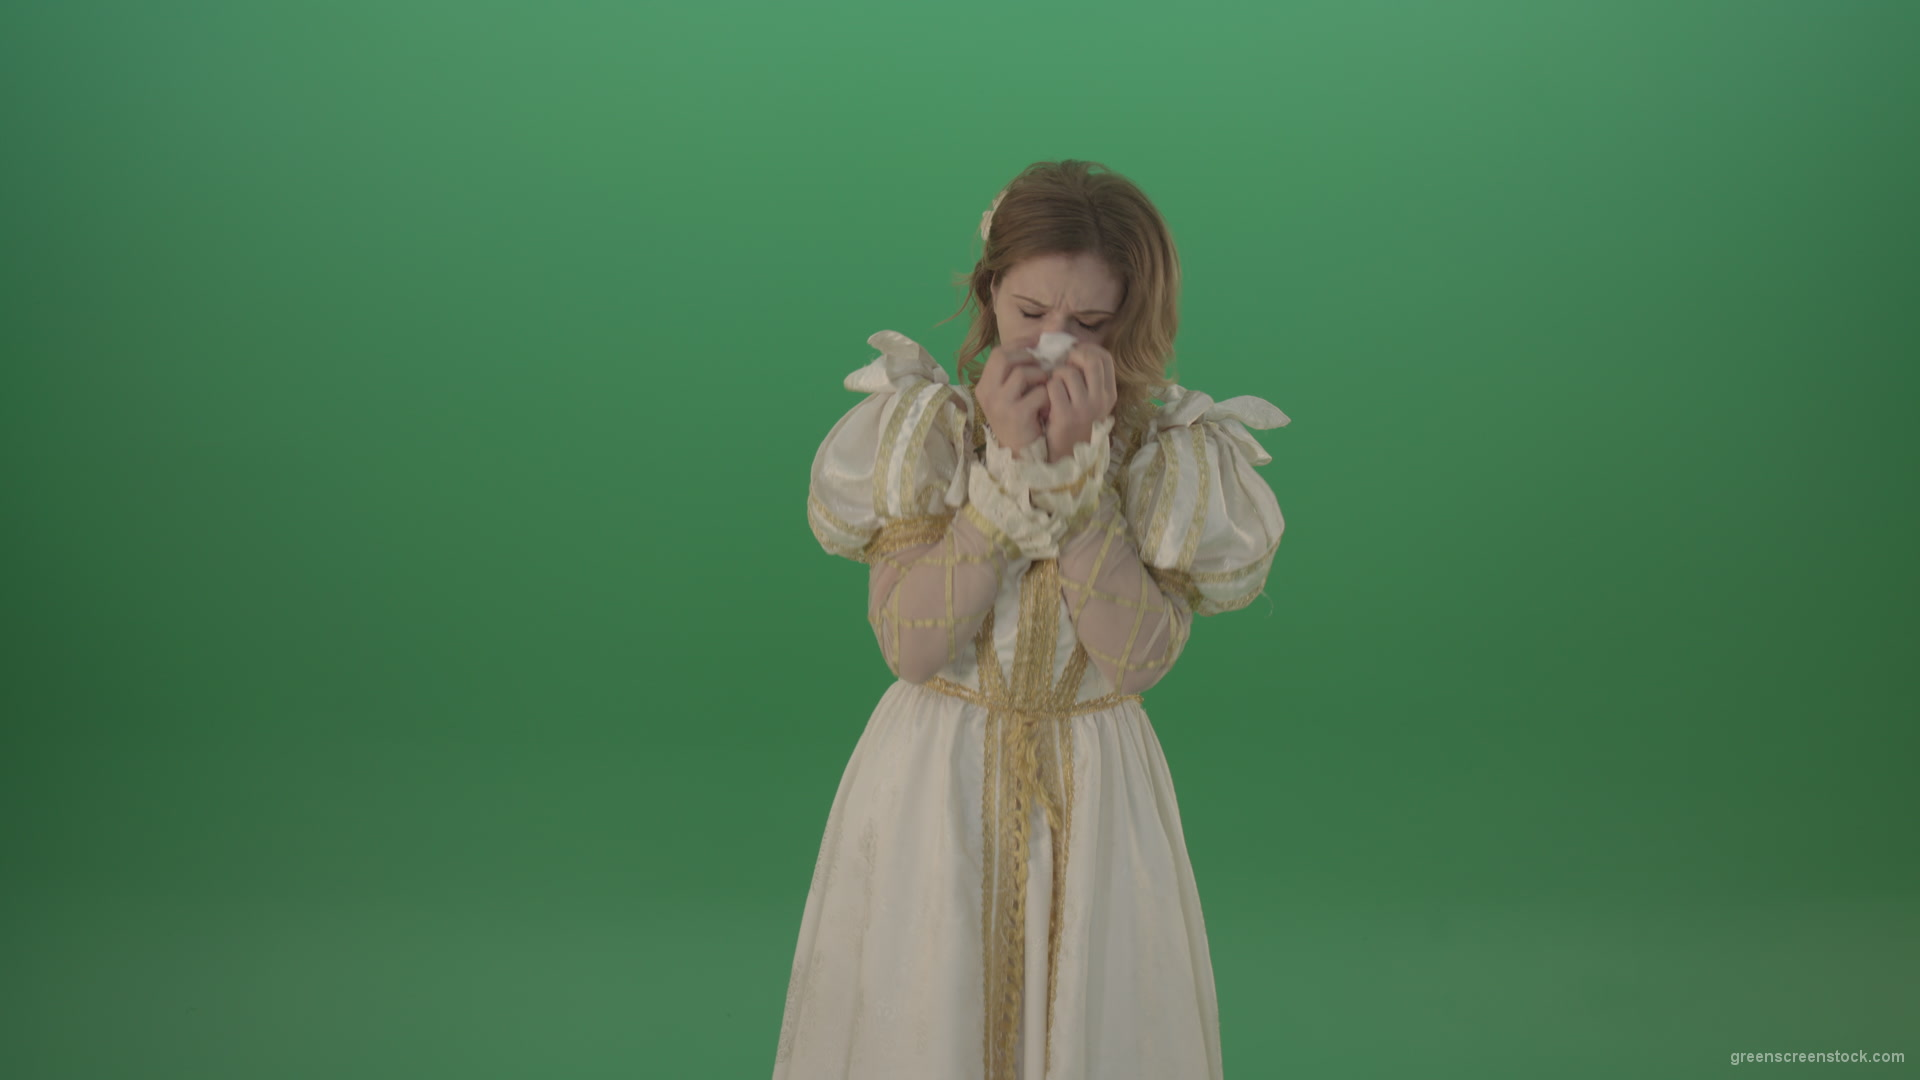 Sick-girl-coughs-and-shows-symptoms-of-the-disease-isolated-on-green-background_009 Green Screen Stock